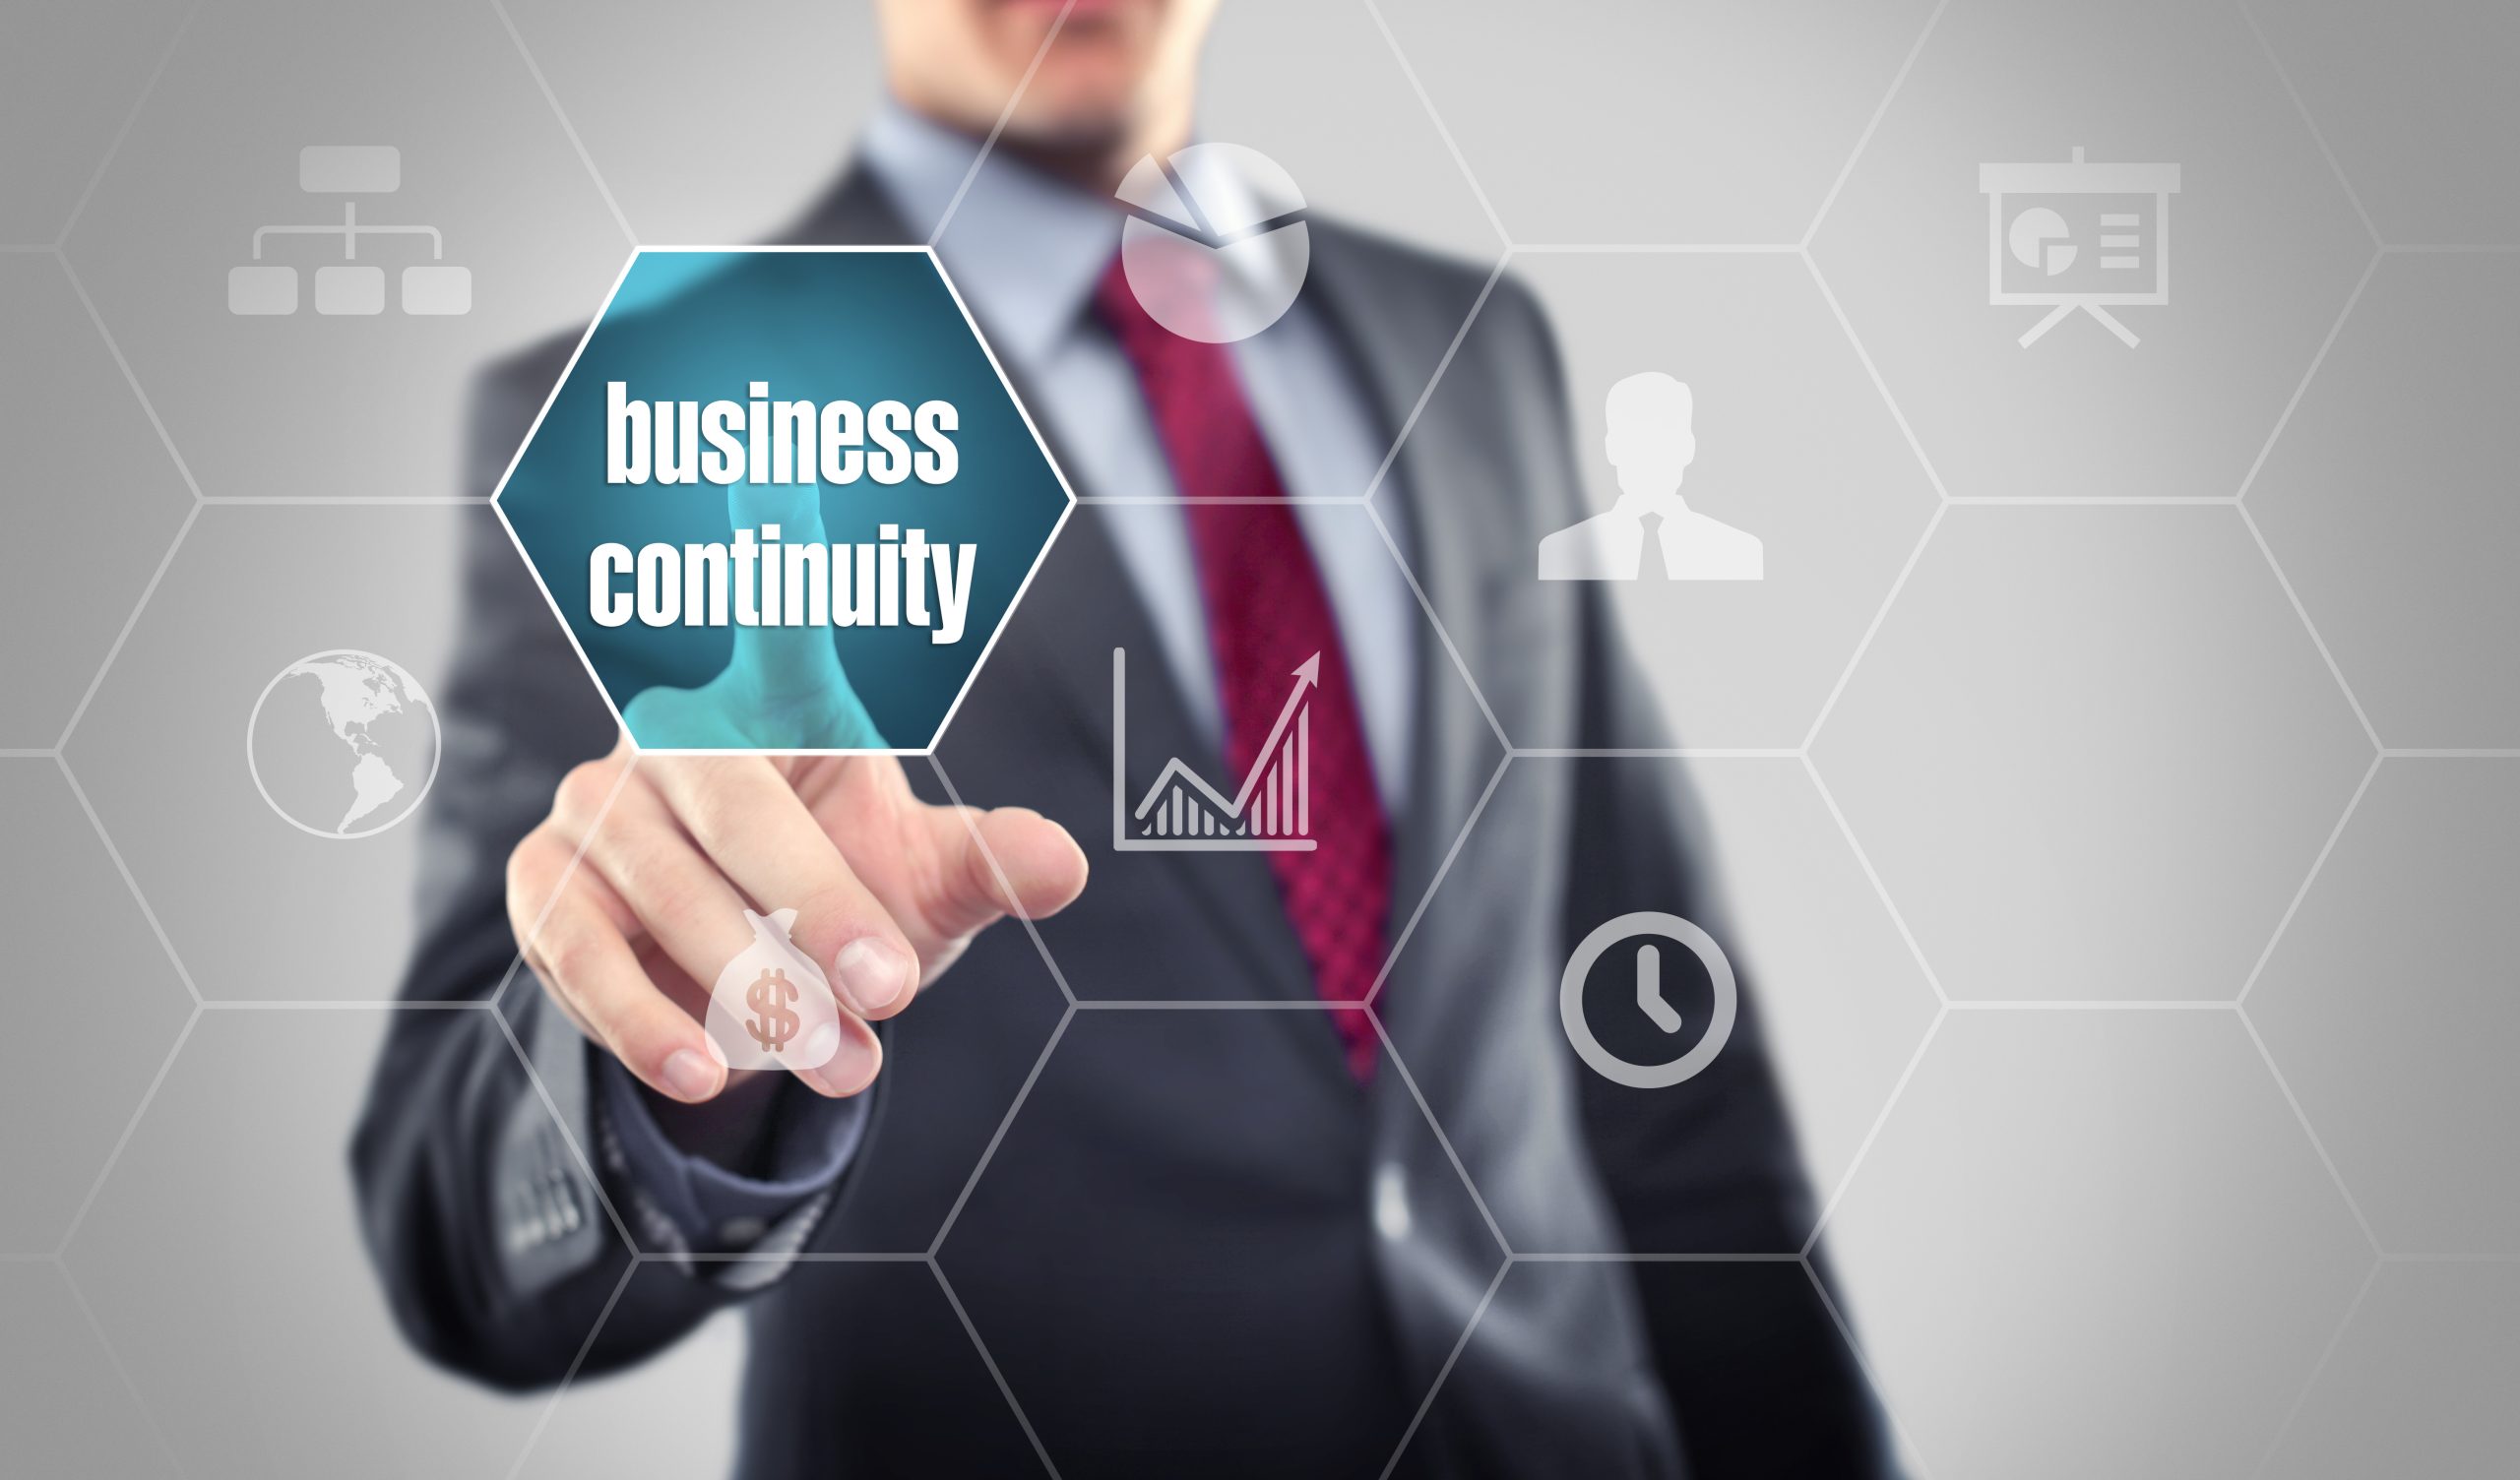 Relying on Solar for Business Continuity